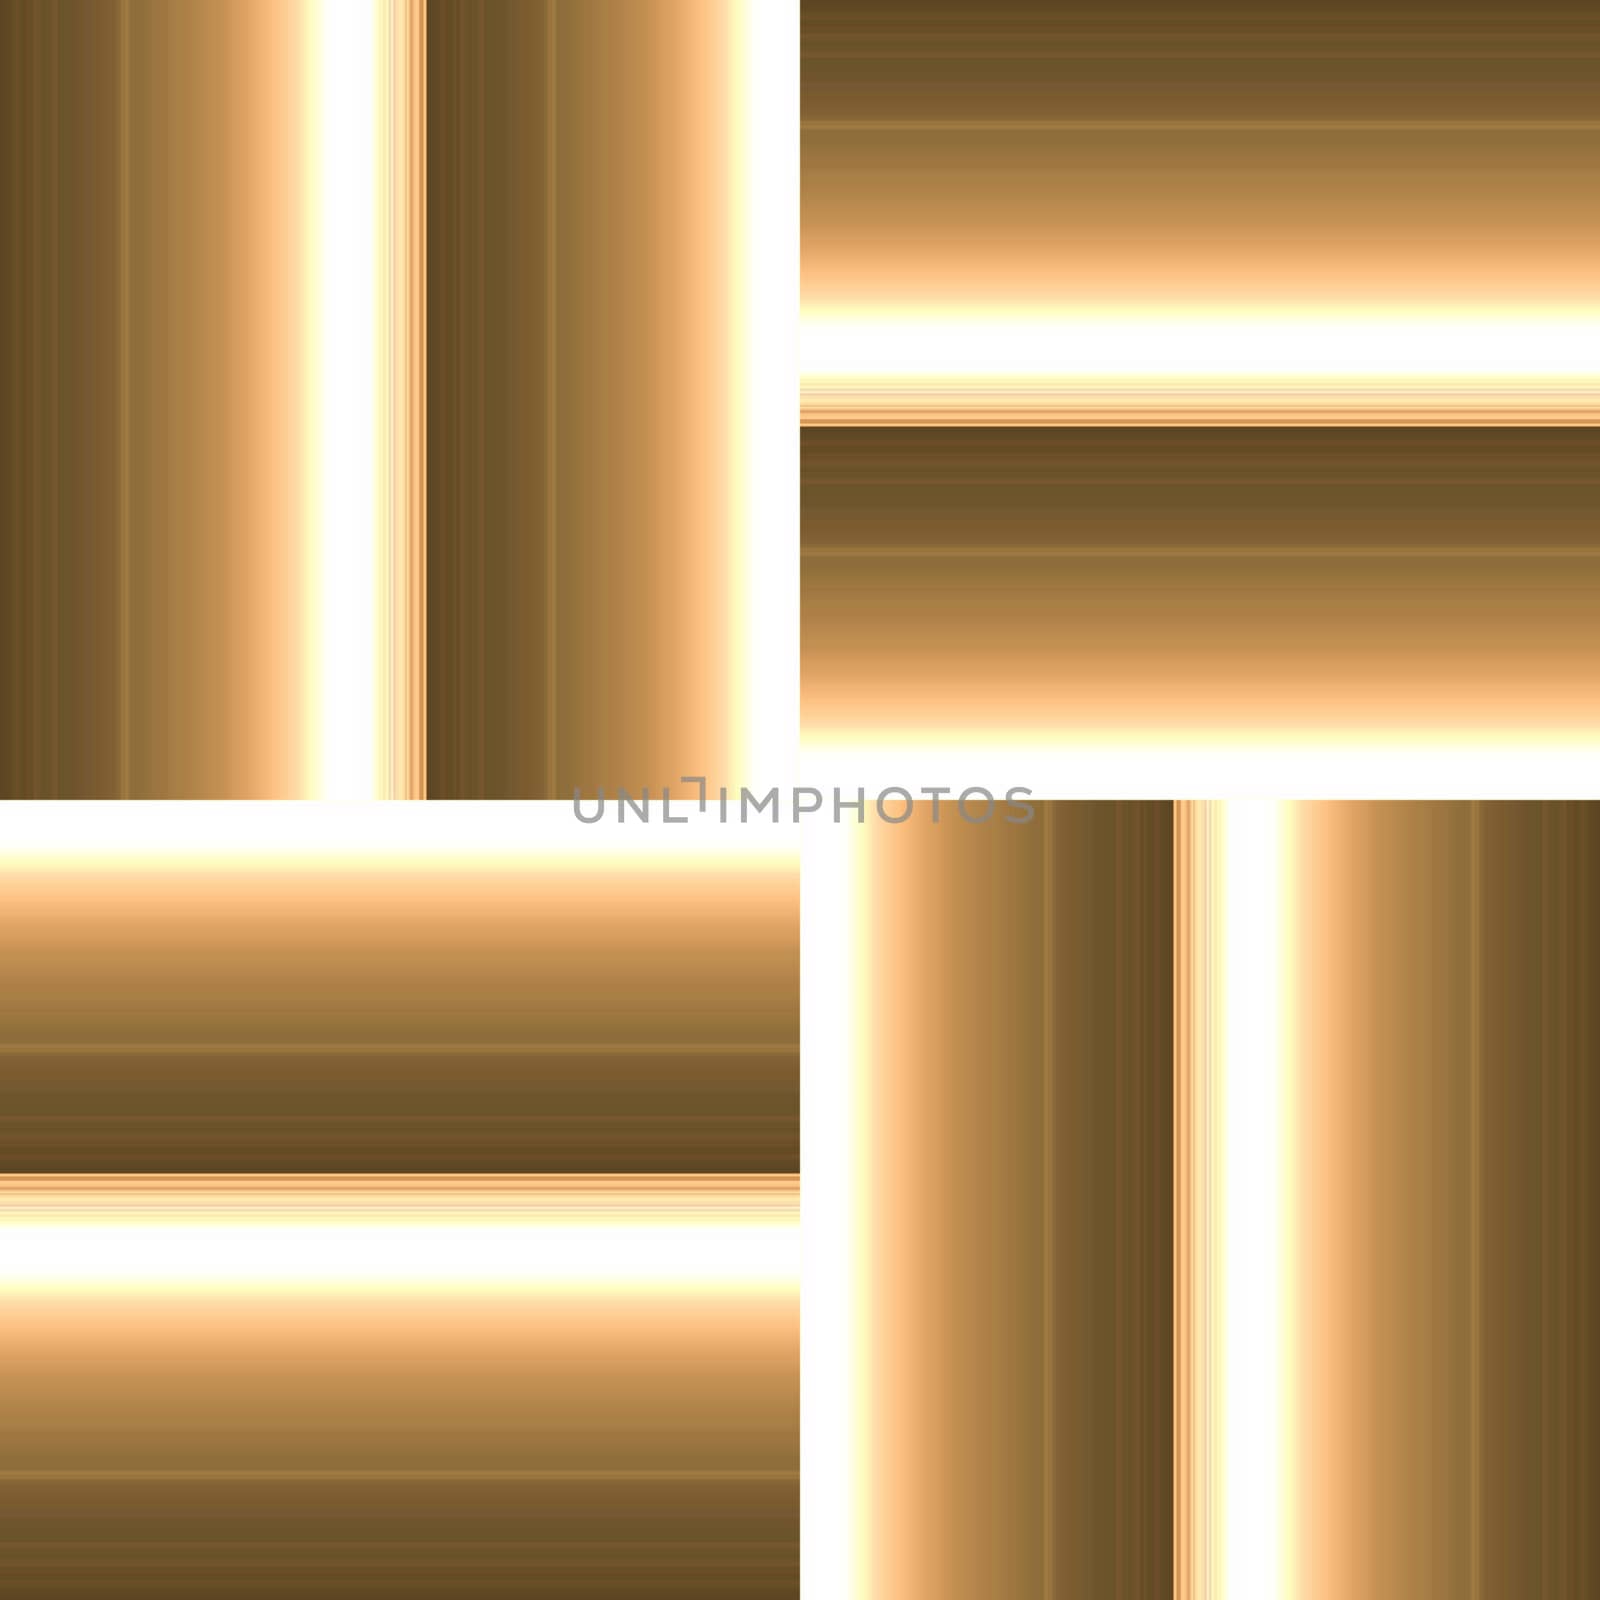 Square patterned background with feeling of dry desert